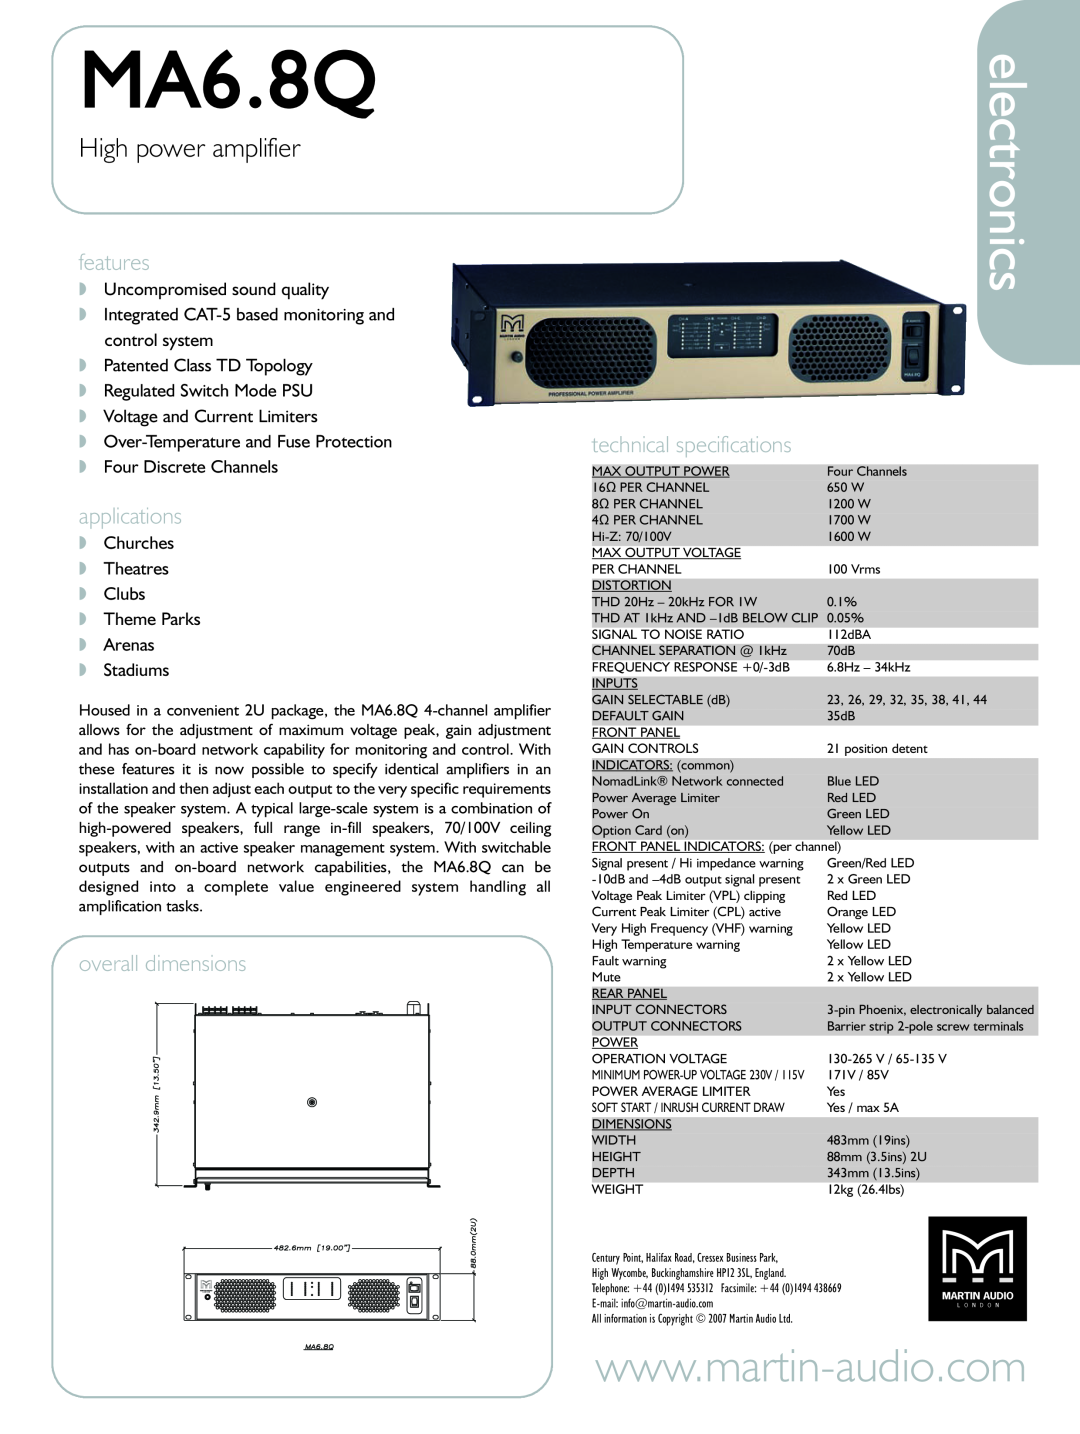 Martin Audio MA6.8Q technical specifications electronics, High power amplifier, features, applications, overall dimensions 